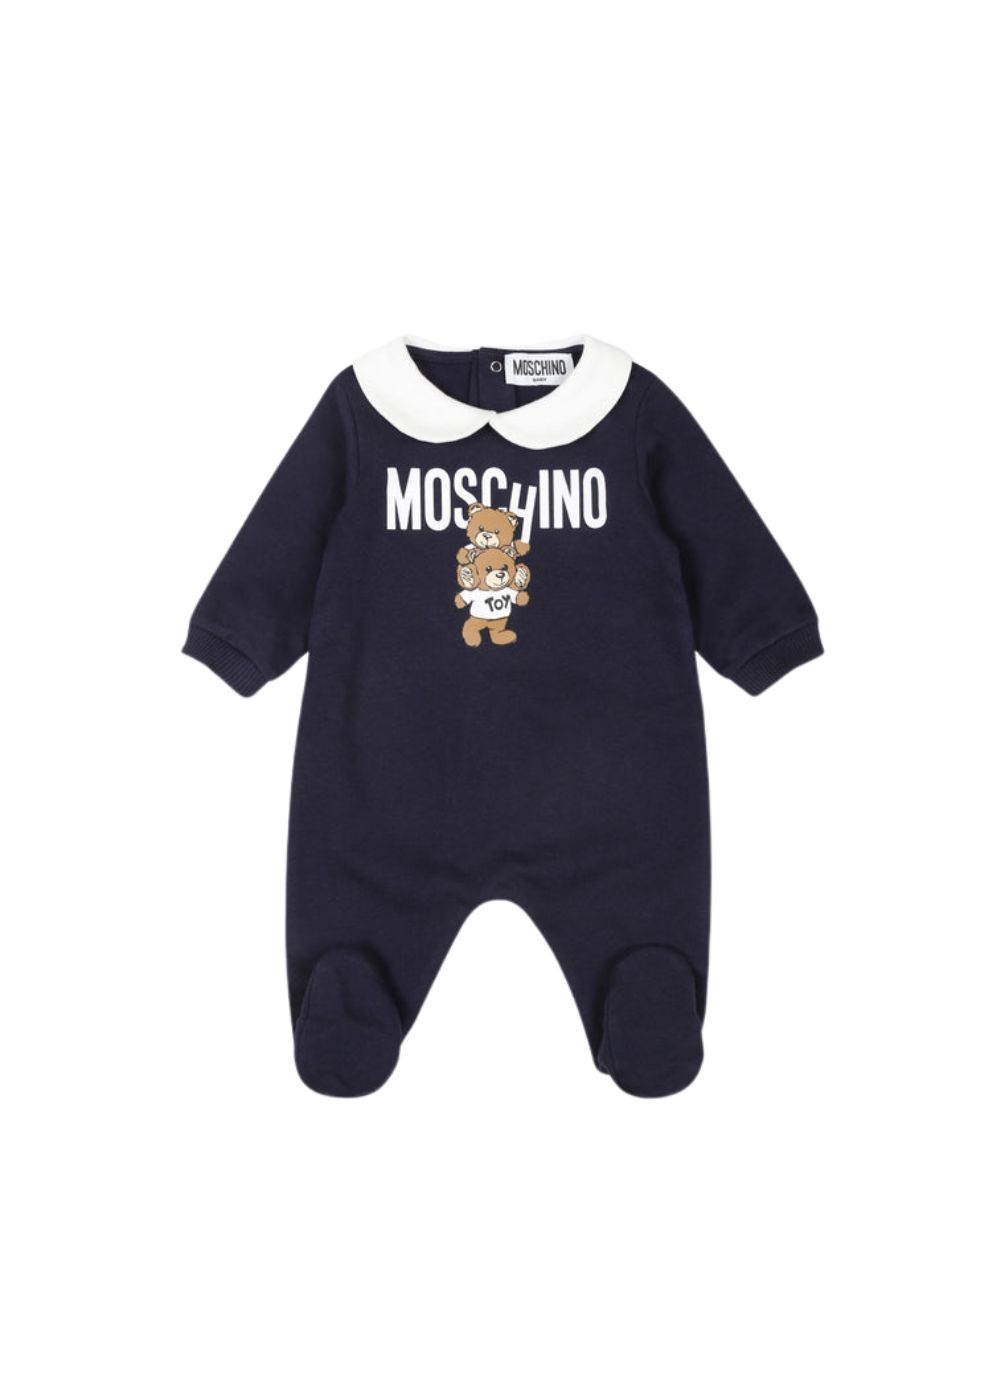 Featured image for “Moschino Tutina stampa Teddy Bear”